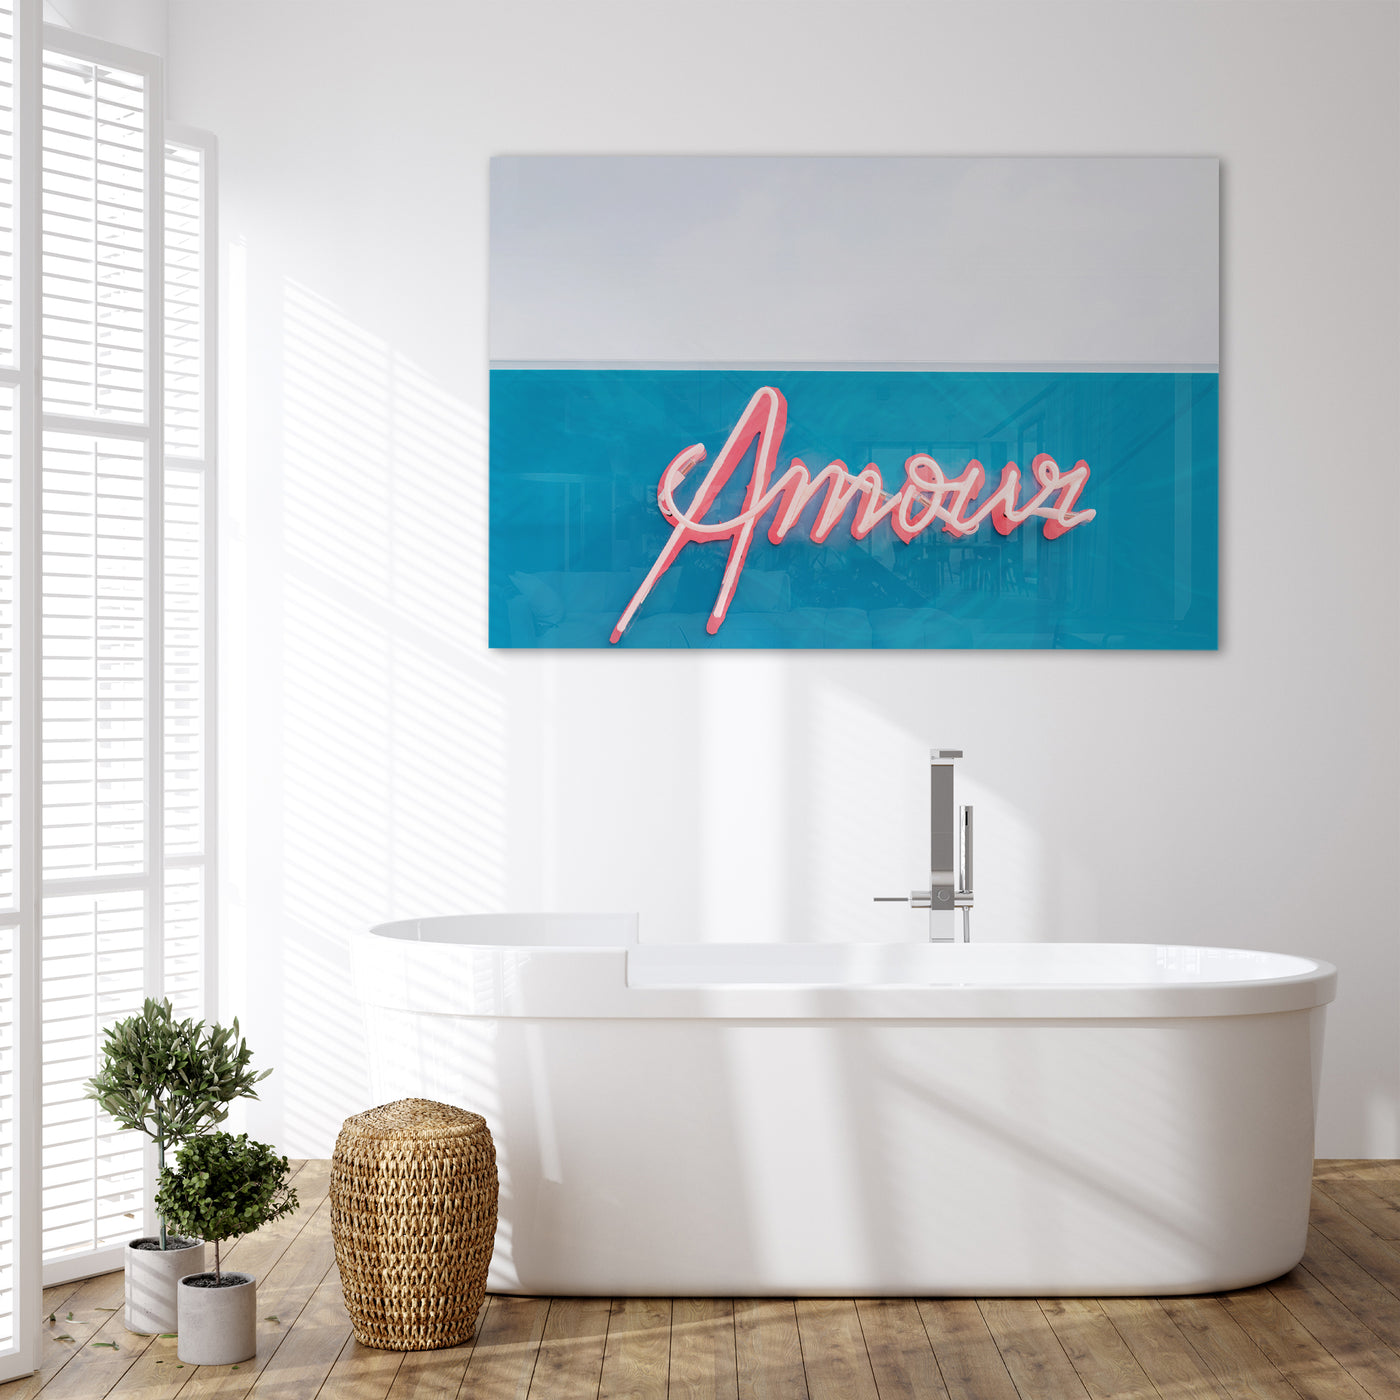 Amour - Modern acrylic glass wall art by Cattie Coyle Photography in bathroom